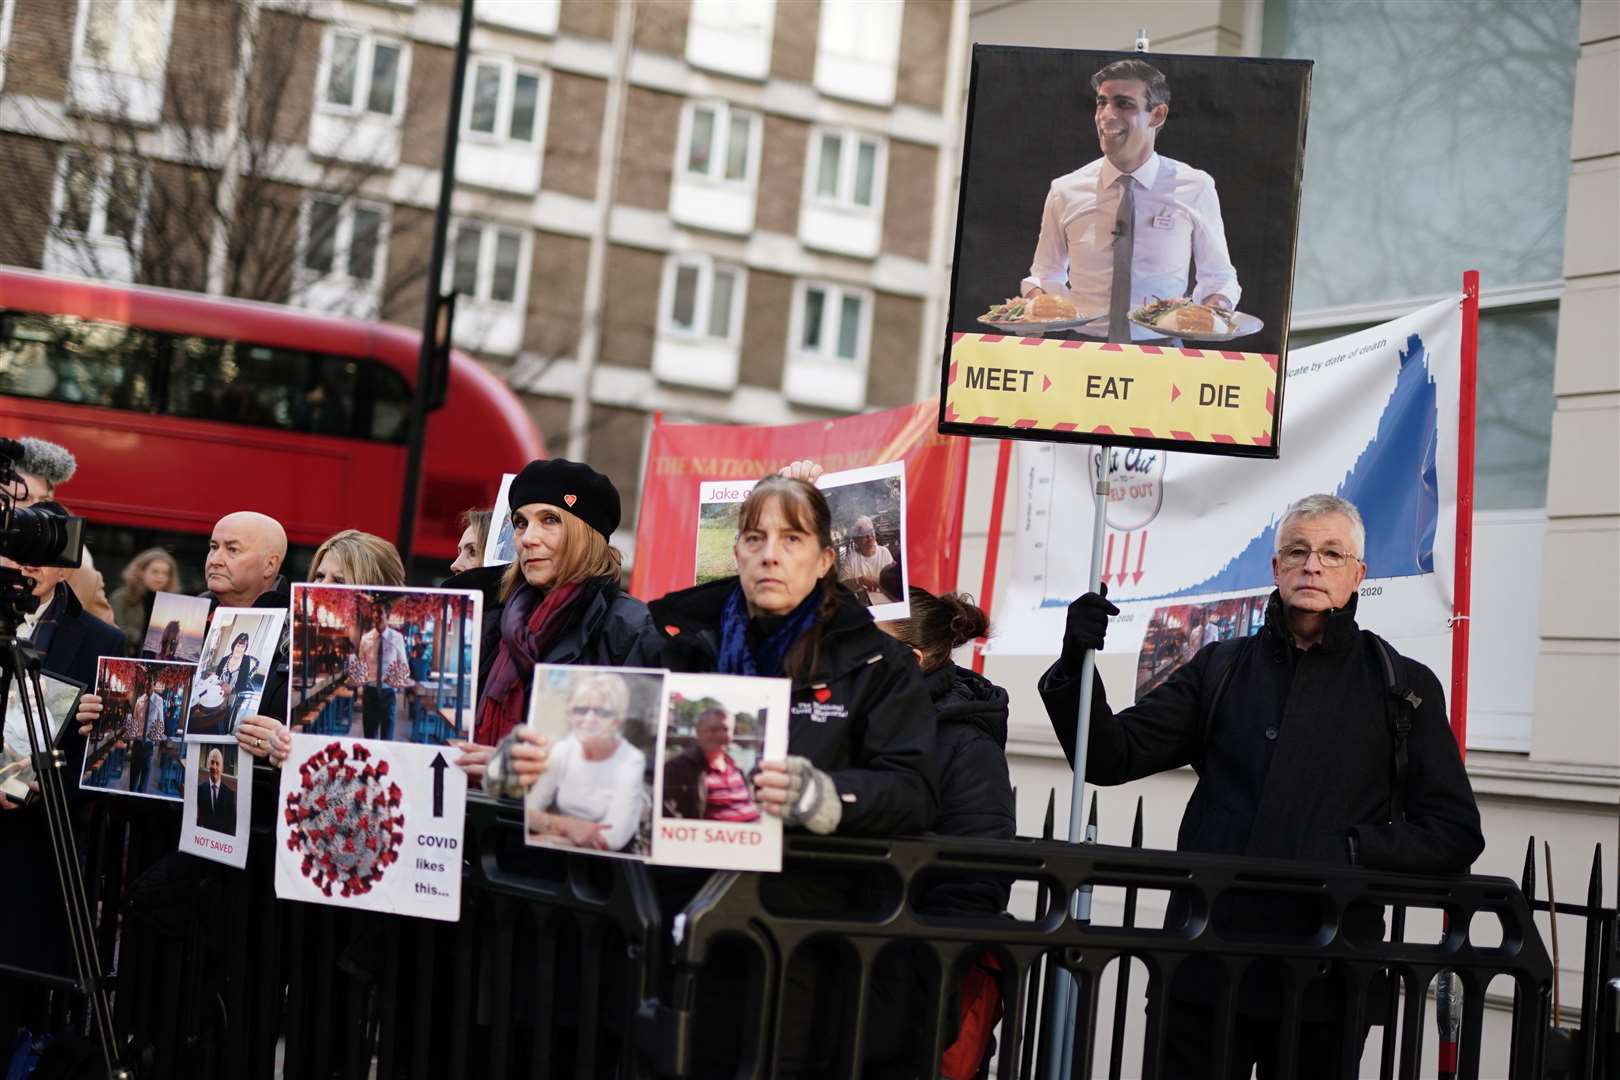 Protesters outside the UK Covid-19 Inquiry at Dorland House in London, where Prime Minister Rishi Sunak is giving evidence (Jordan Pettitt/PA)